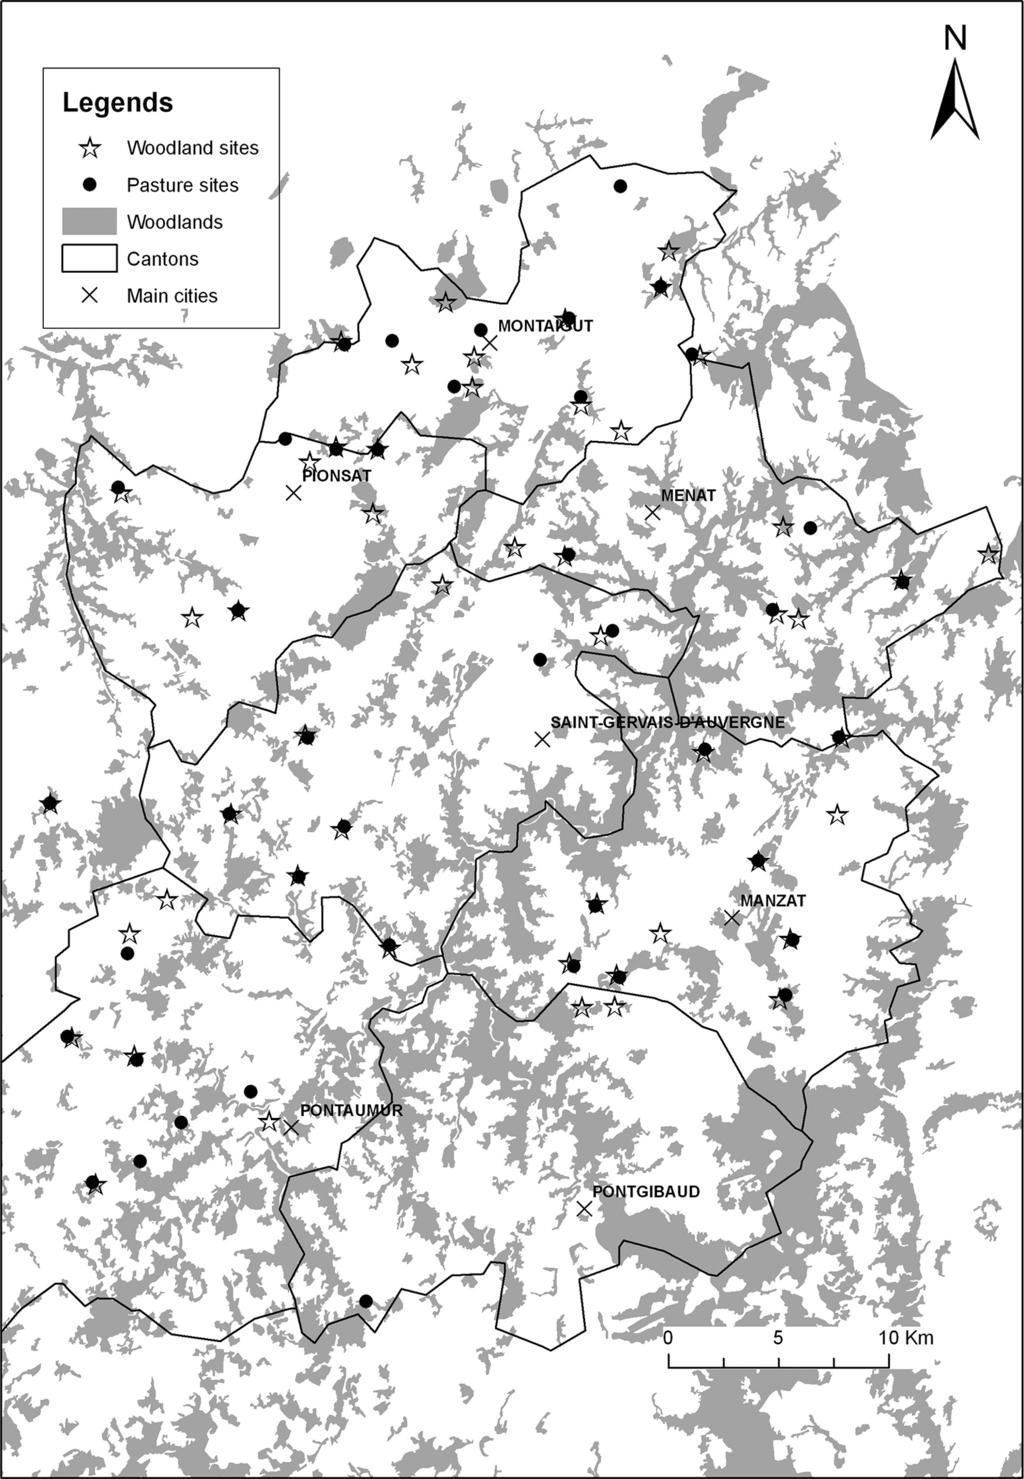 VOL. 76, 2010 TICK-BORNE BACTERIA IN QUESTING I. RICINUS TICKS 4415 FIG. 1. Map of the Combrailles region of central France (latitude, 45.8 to 46.2 N; longitude, 2.